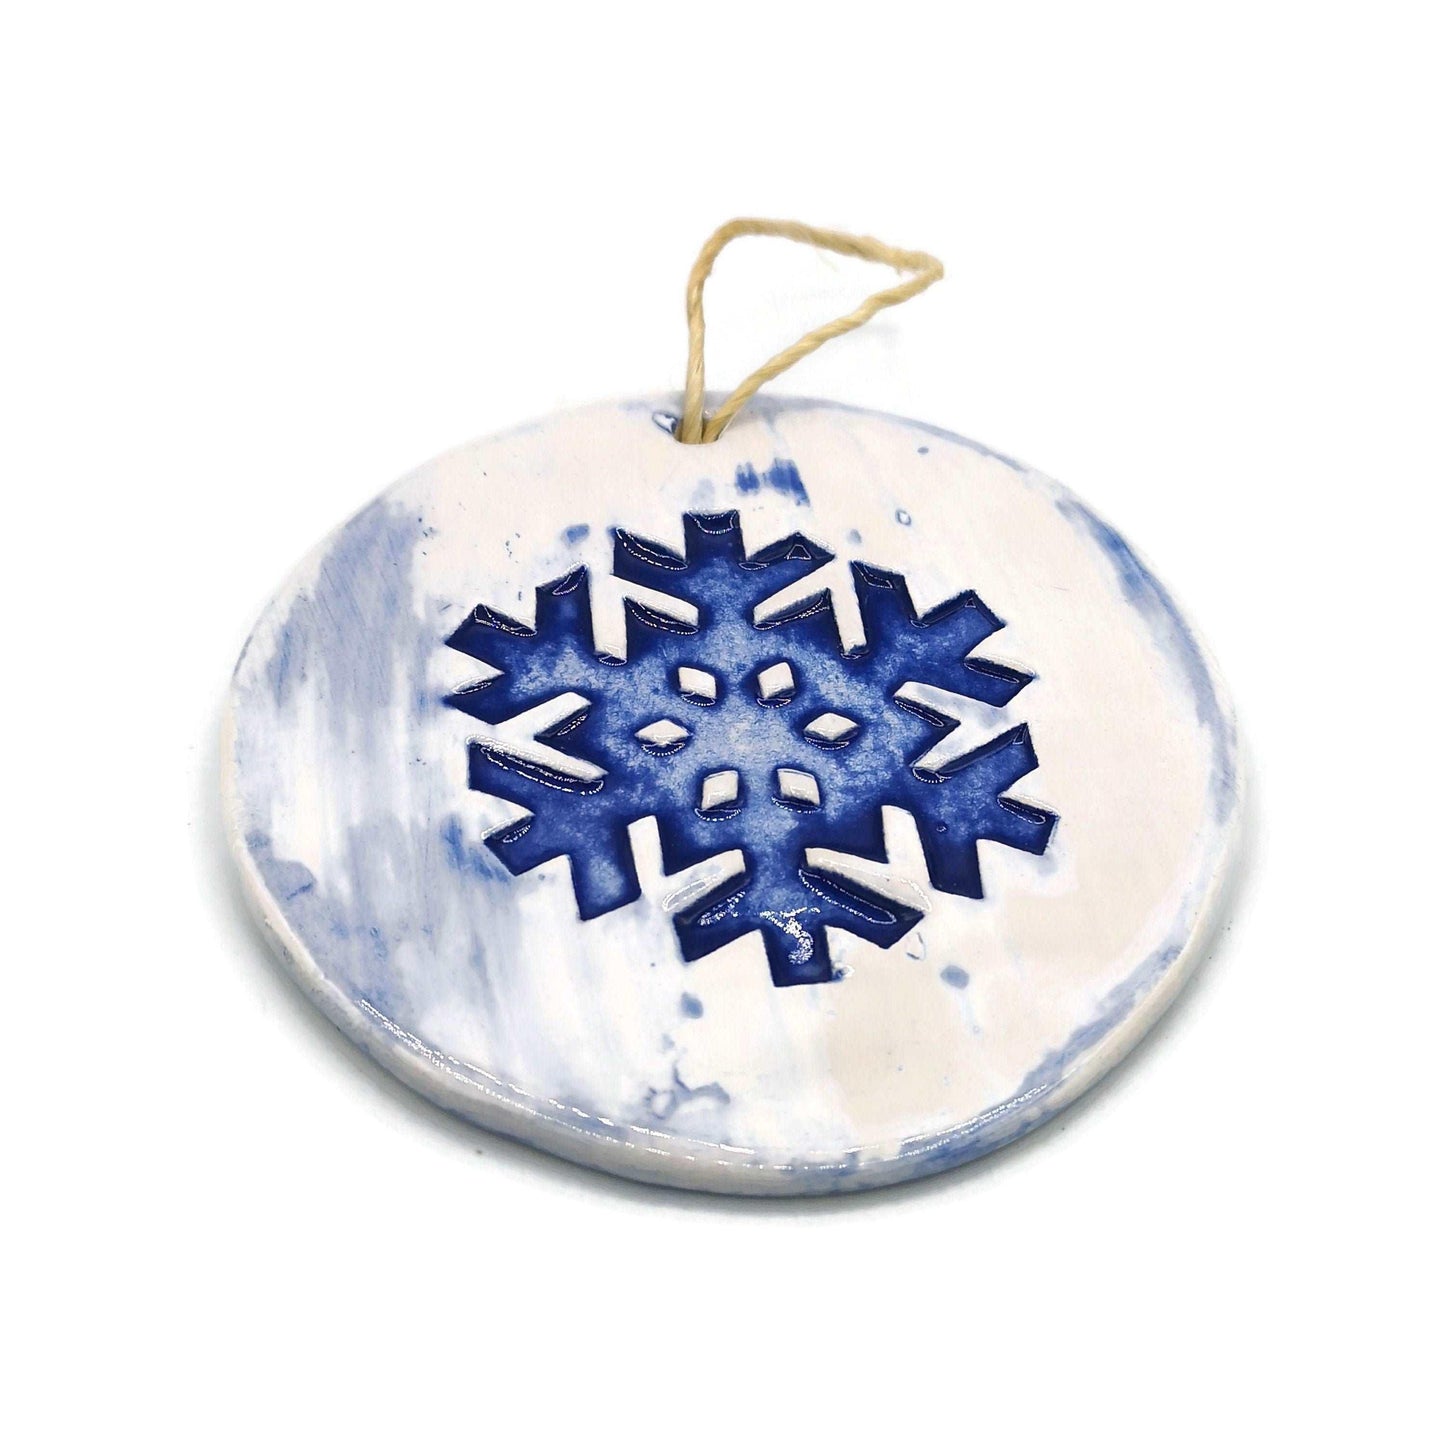 1Pc CERAMIC SNOWFLAKE ORNAMENTS, Clay Wall Hanging, Home Decor Gifts Christmas, Blue Handmade Holidays Home Decor, Winter Accents